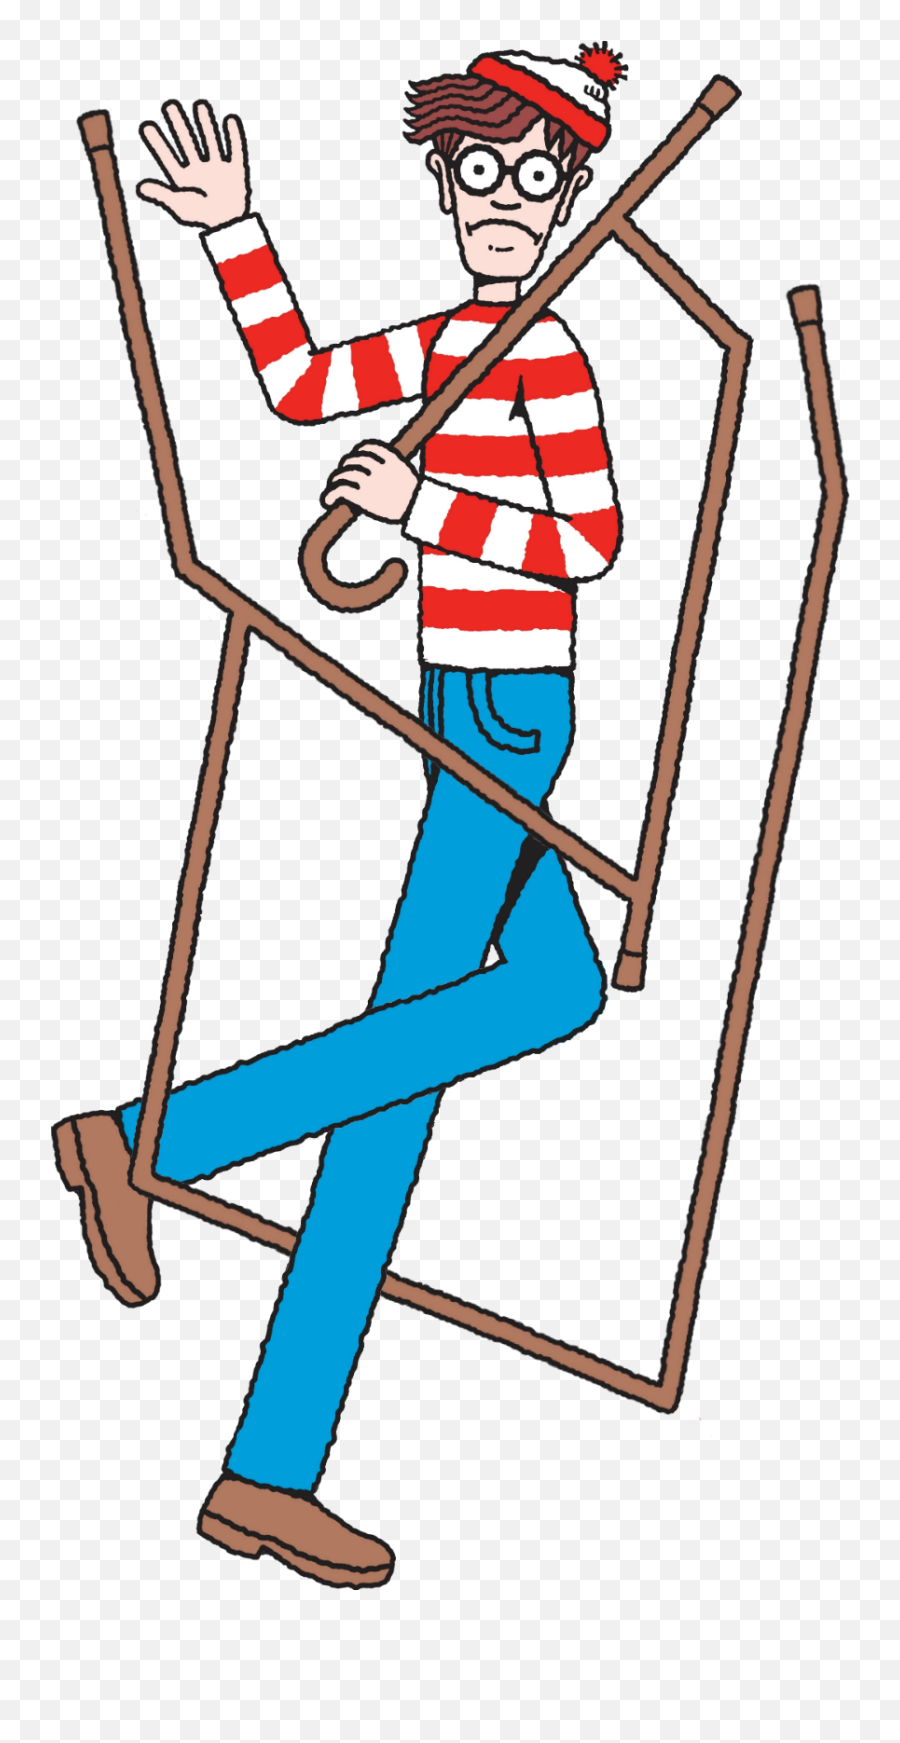 Wally Waldo Lifesize Cardboard - Easy Halloween Costumes With Regular Clothes Png,Waldo Png